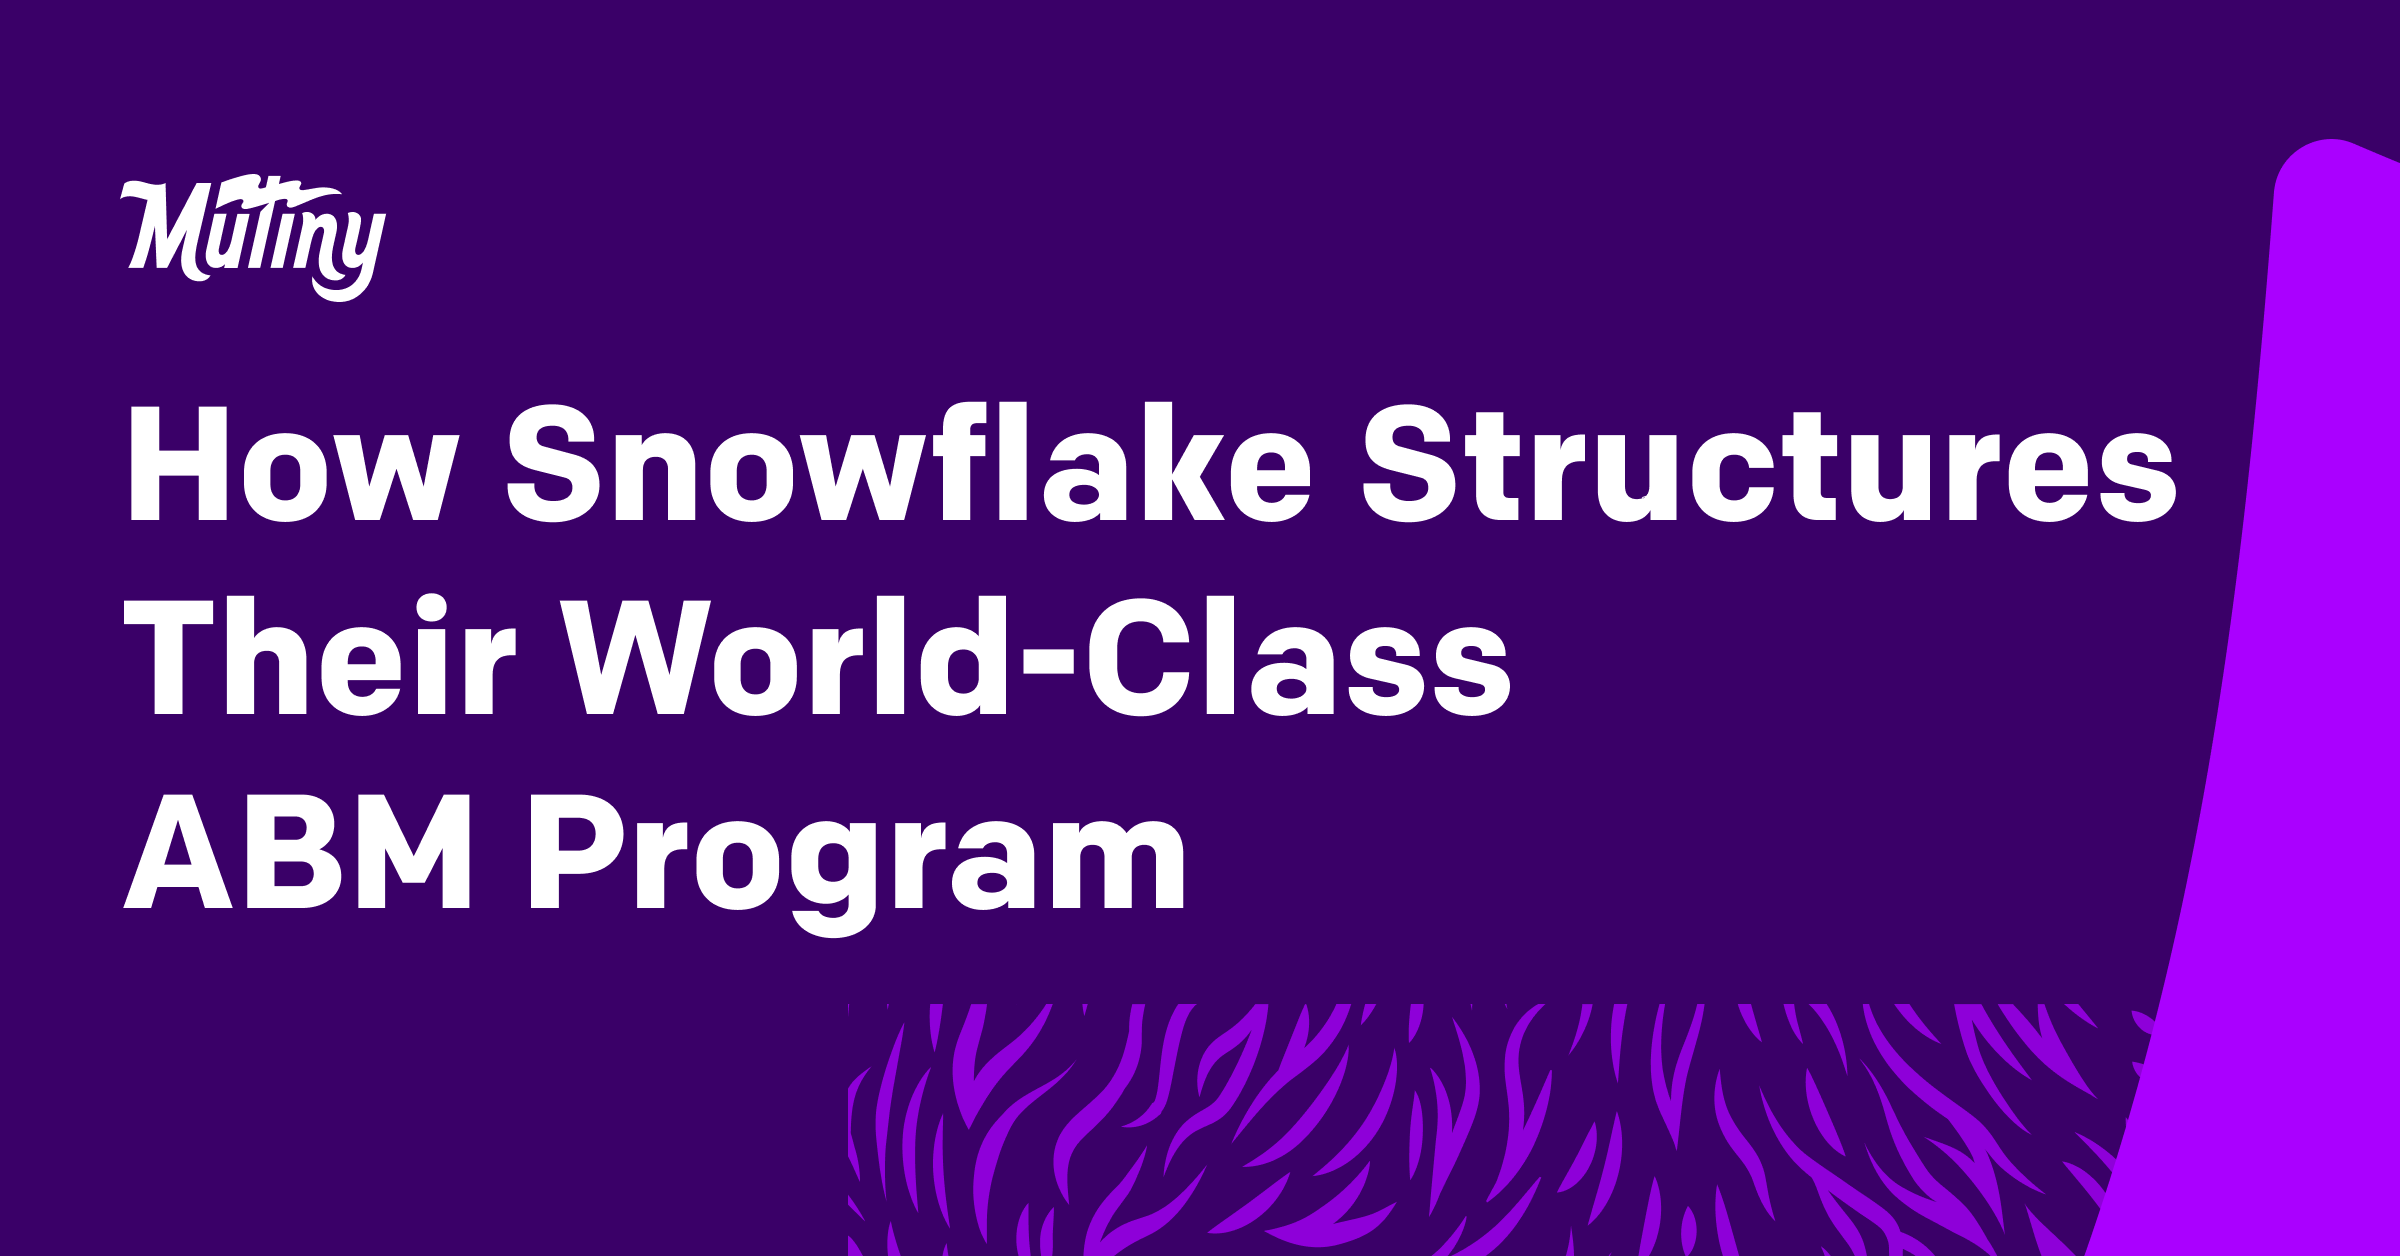 How Snowflake Structures Their World-Class ABM Program